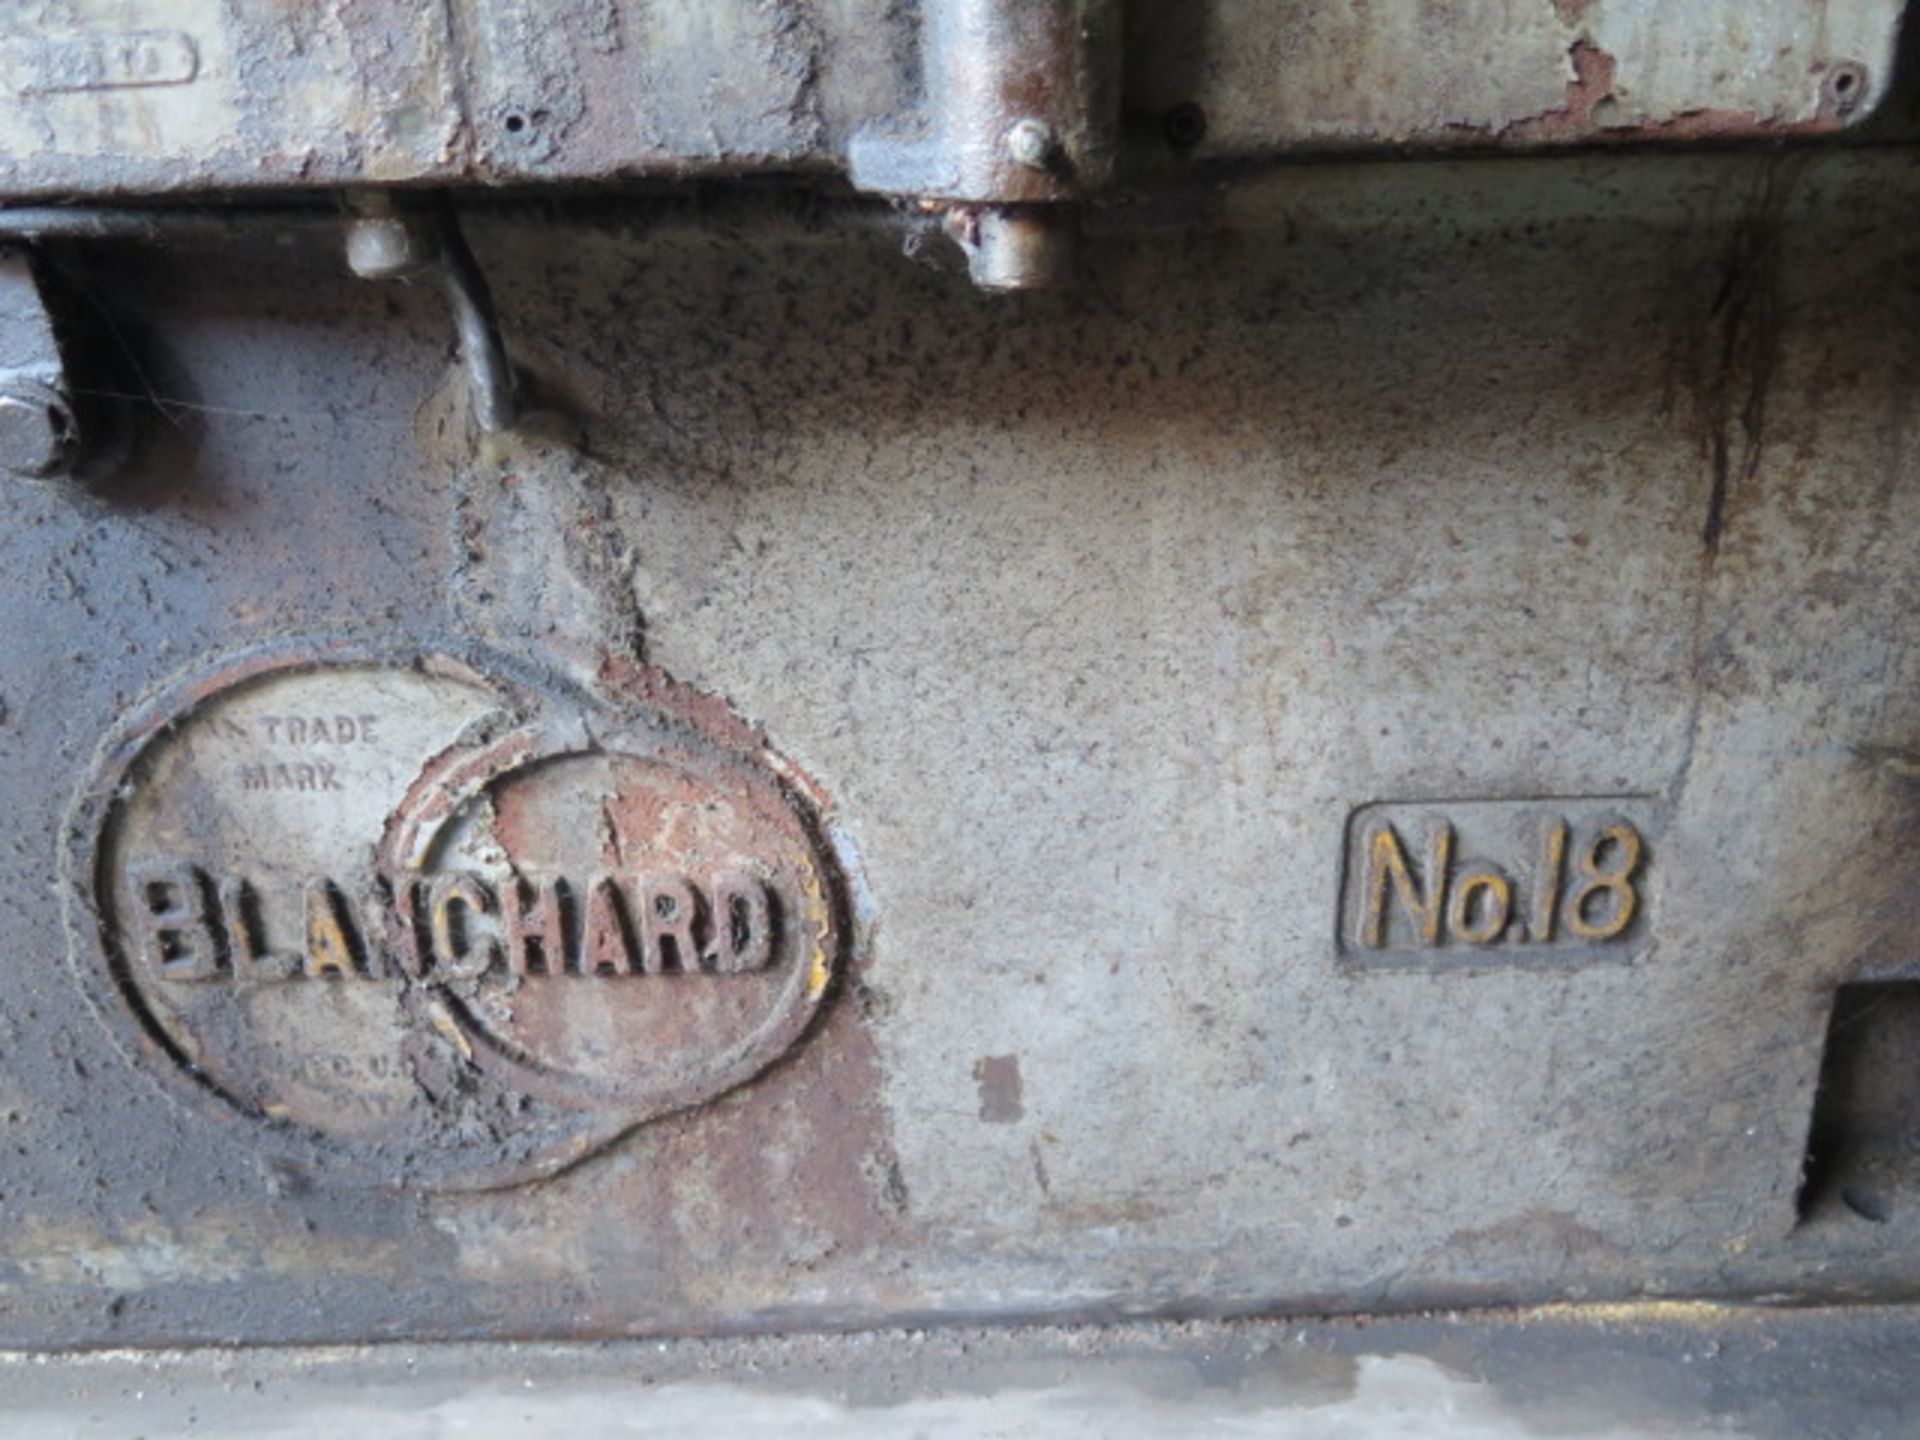 Blanchard No. 18 Rotary Surface Grinder s/n 7907 w/ 30” Magnetic Chuck, 18” Grinding Head,SOLD AS IS - Image 8 of 9